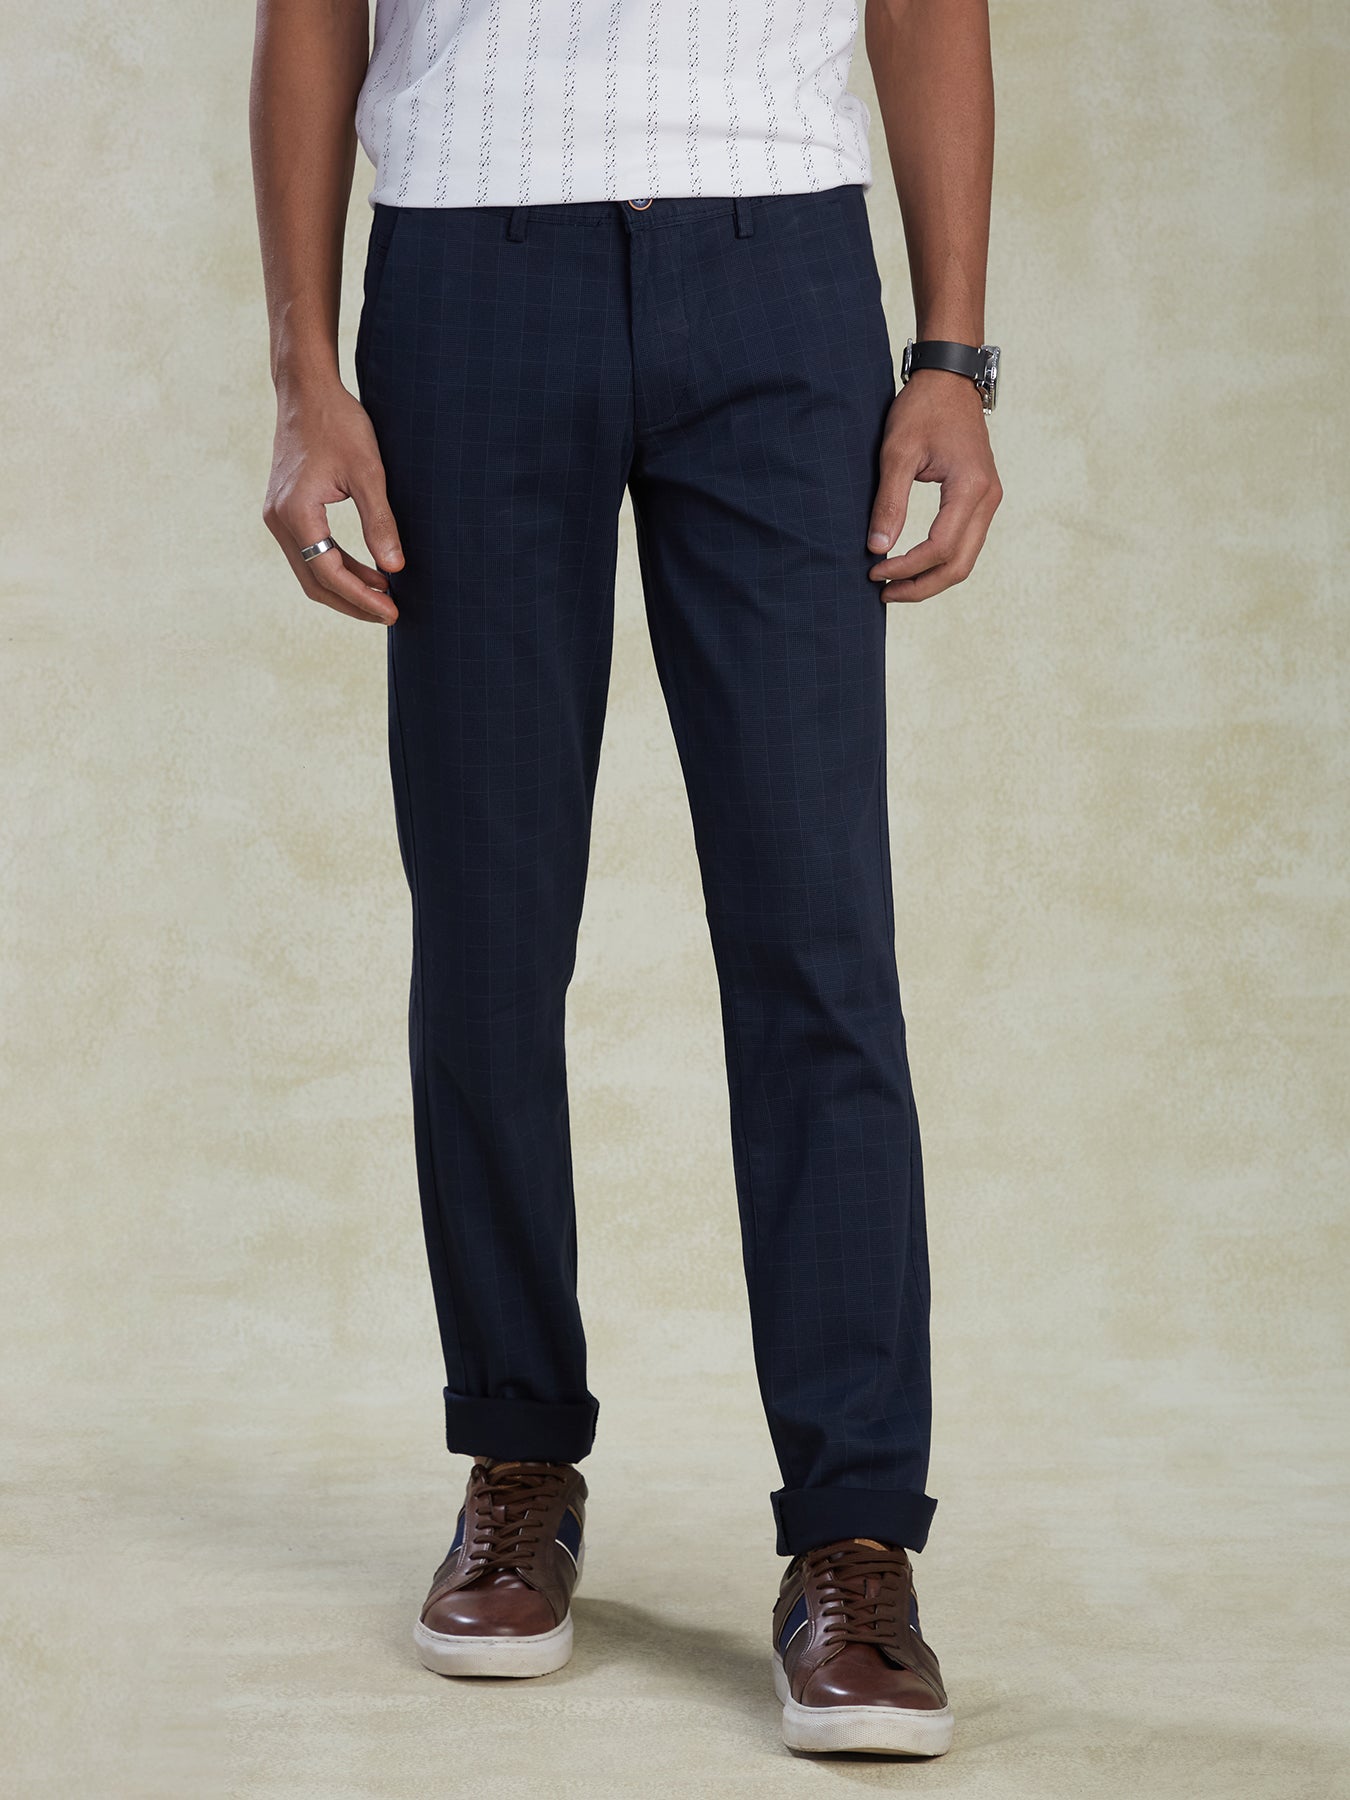 cotton-stretch-navy-blue-ultra-slim-fit-flat-front-casual-mens-trouser